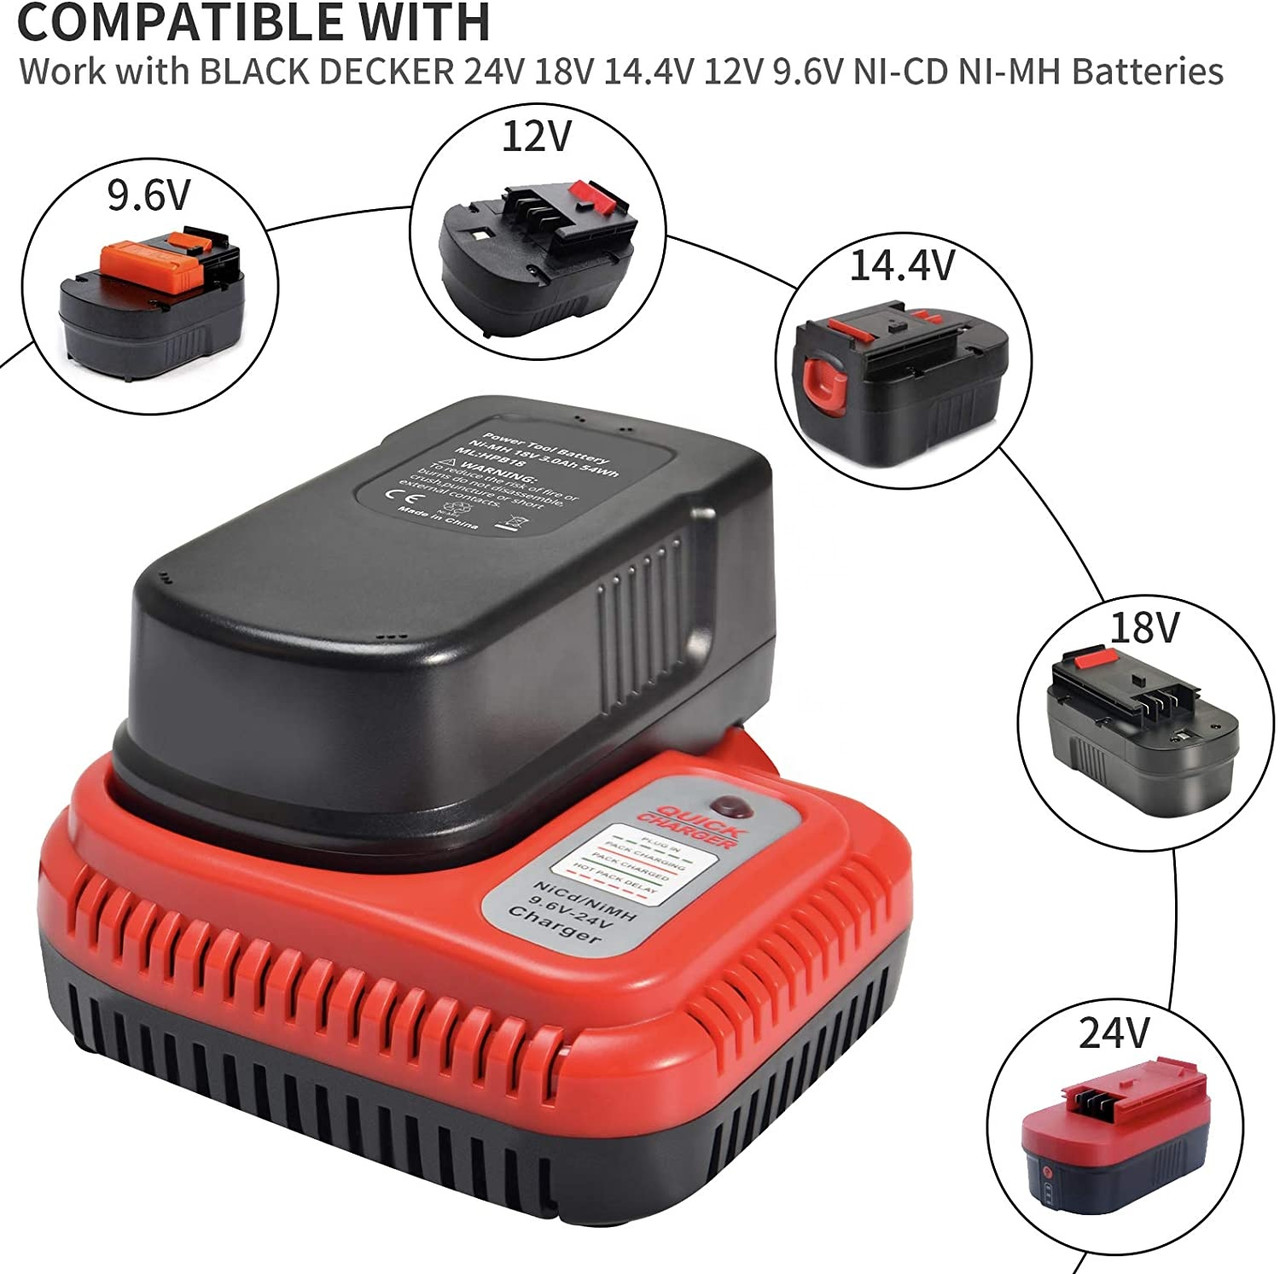 1.5A Rapid Charger for Black &Decker 18 Volt HPB18 HPB18-OPE Ni-Cd Ni-Mh  Battery 